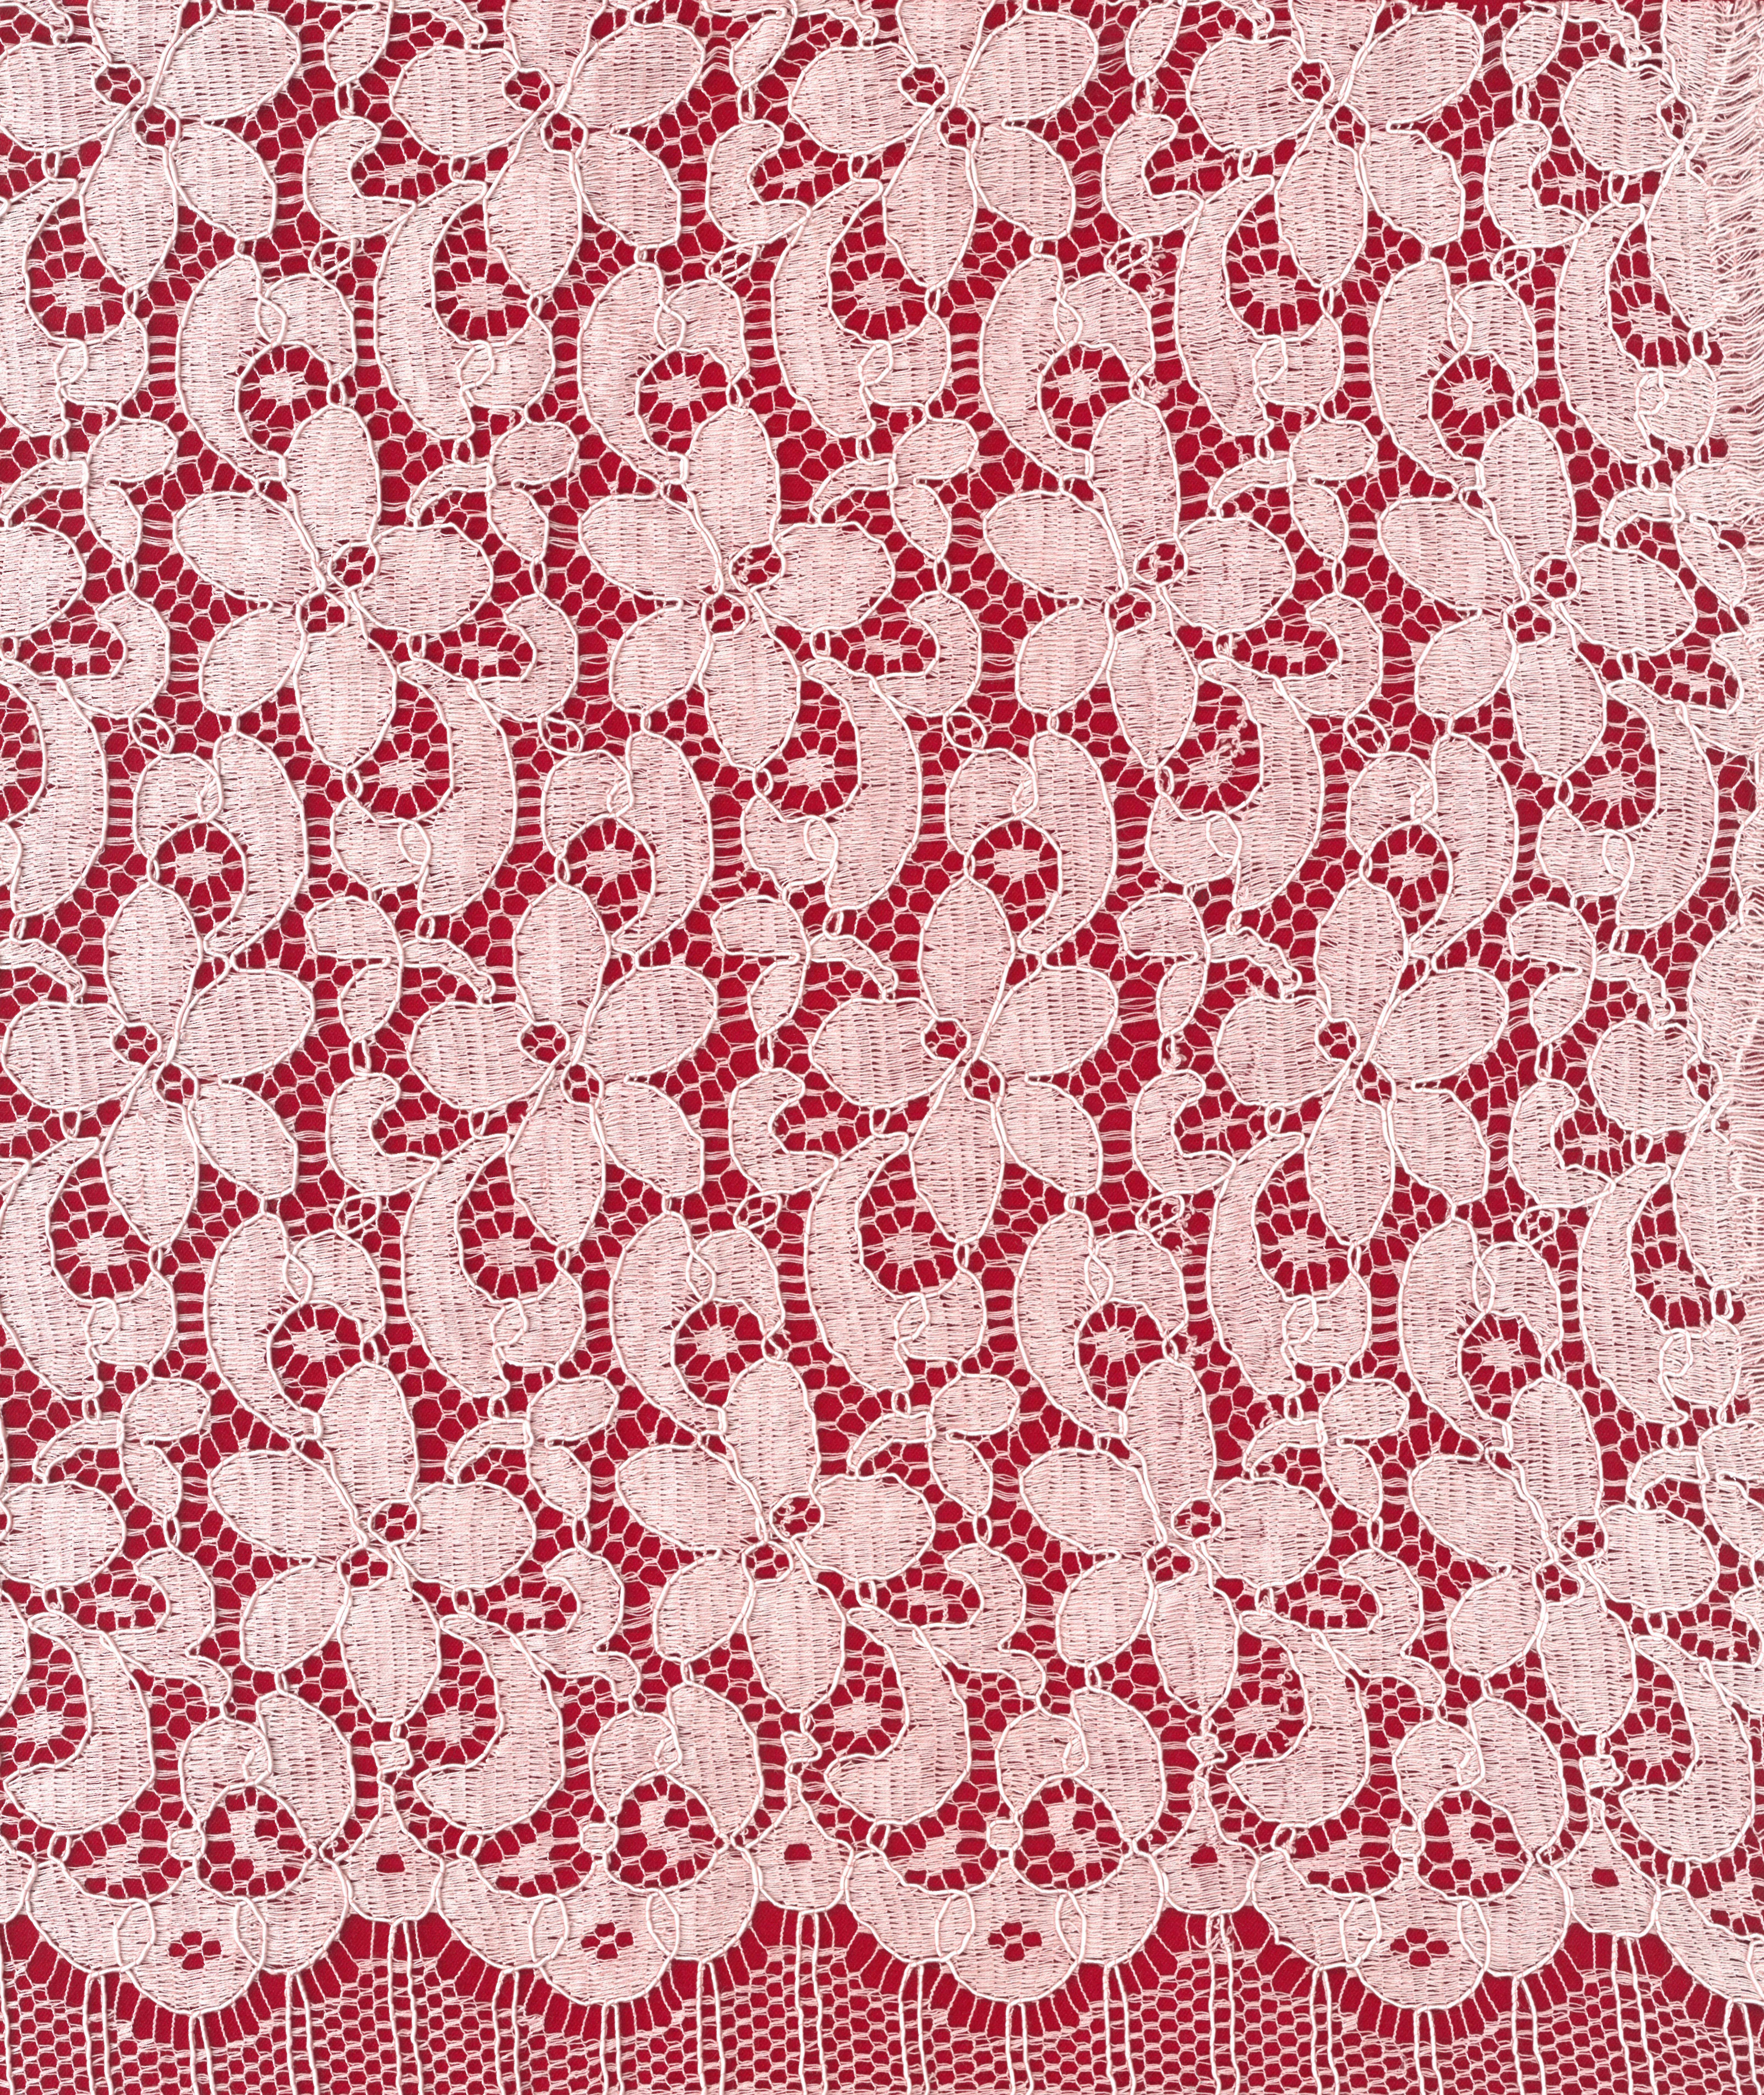 CORDED FRENCH LACE - LIGHT ROSE